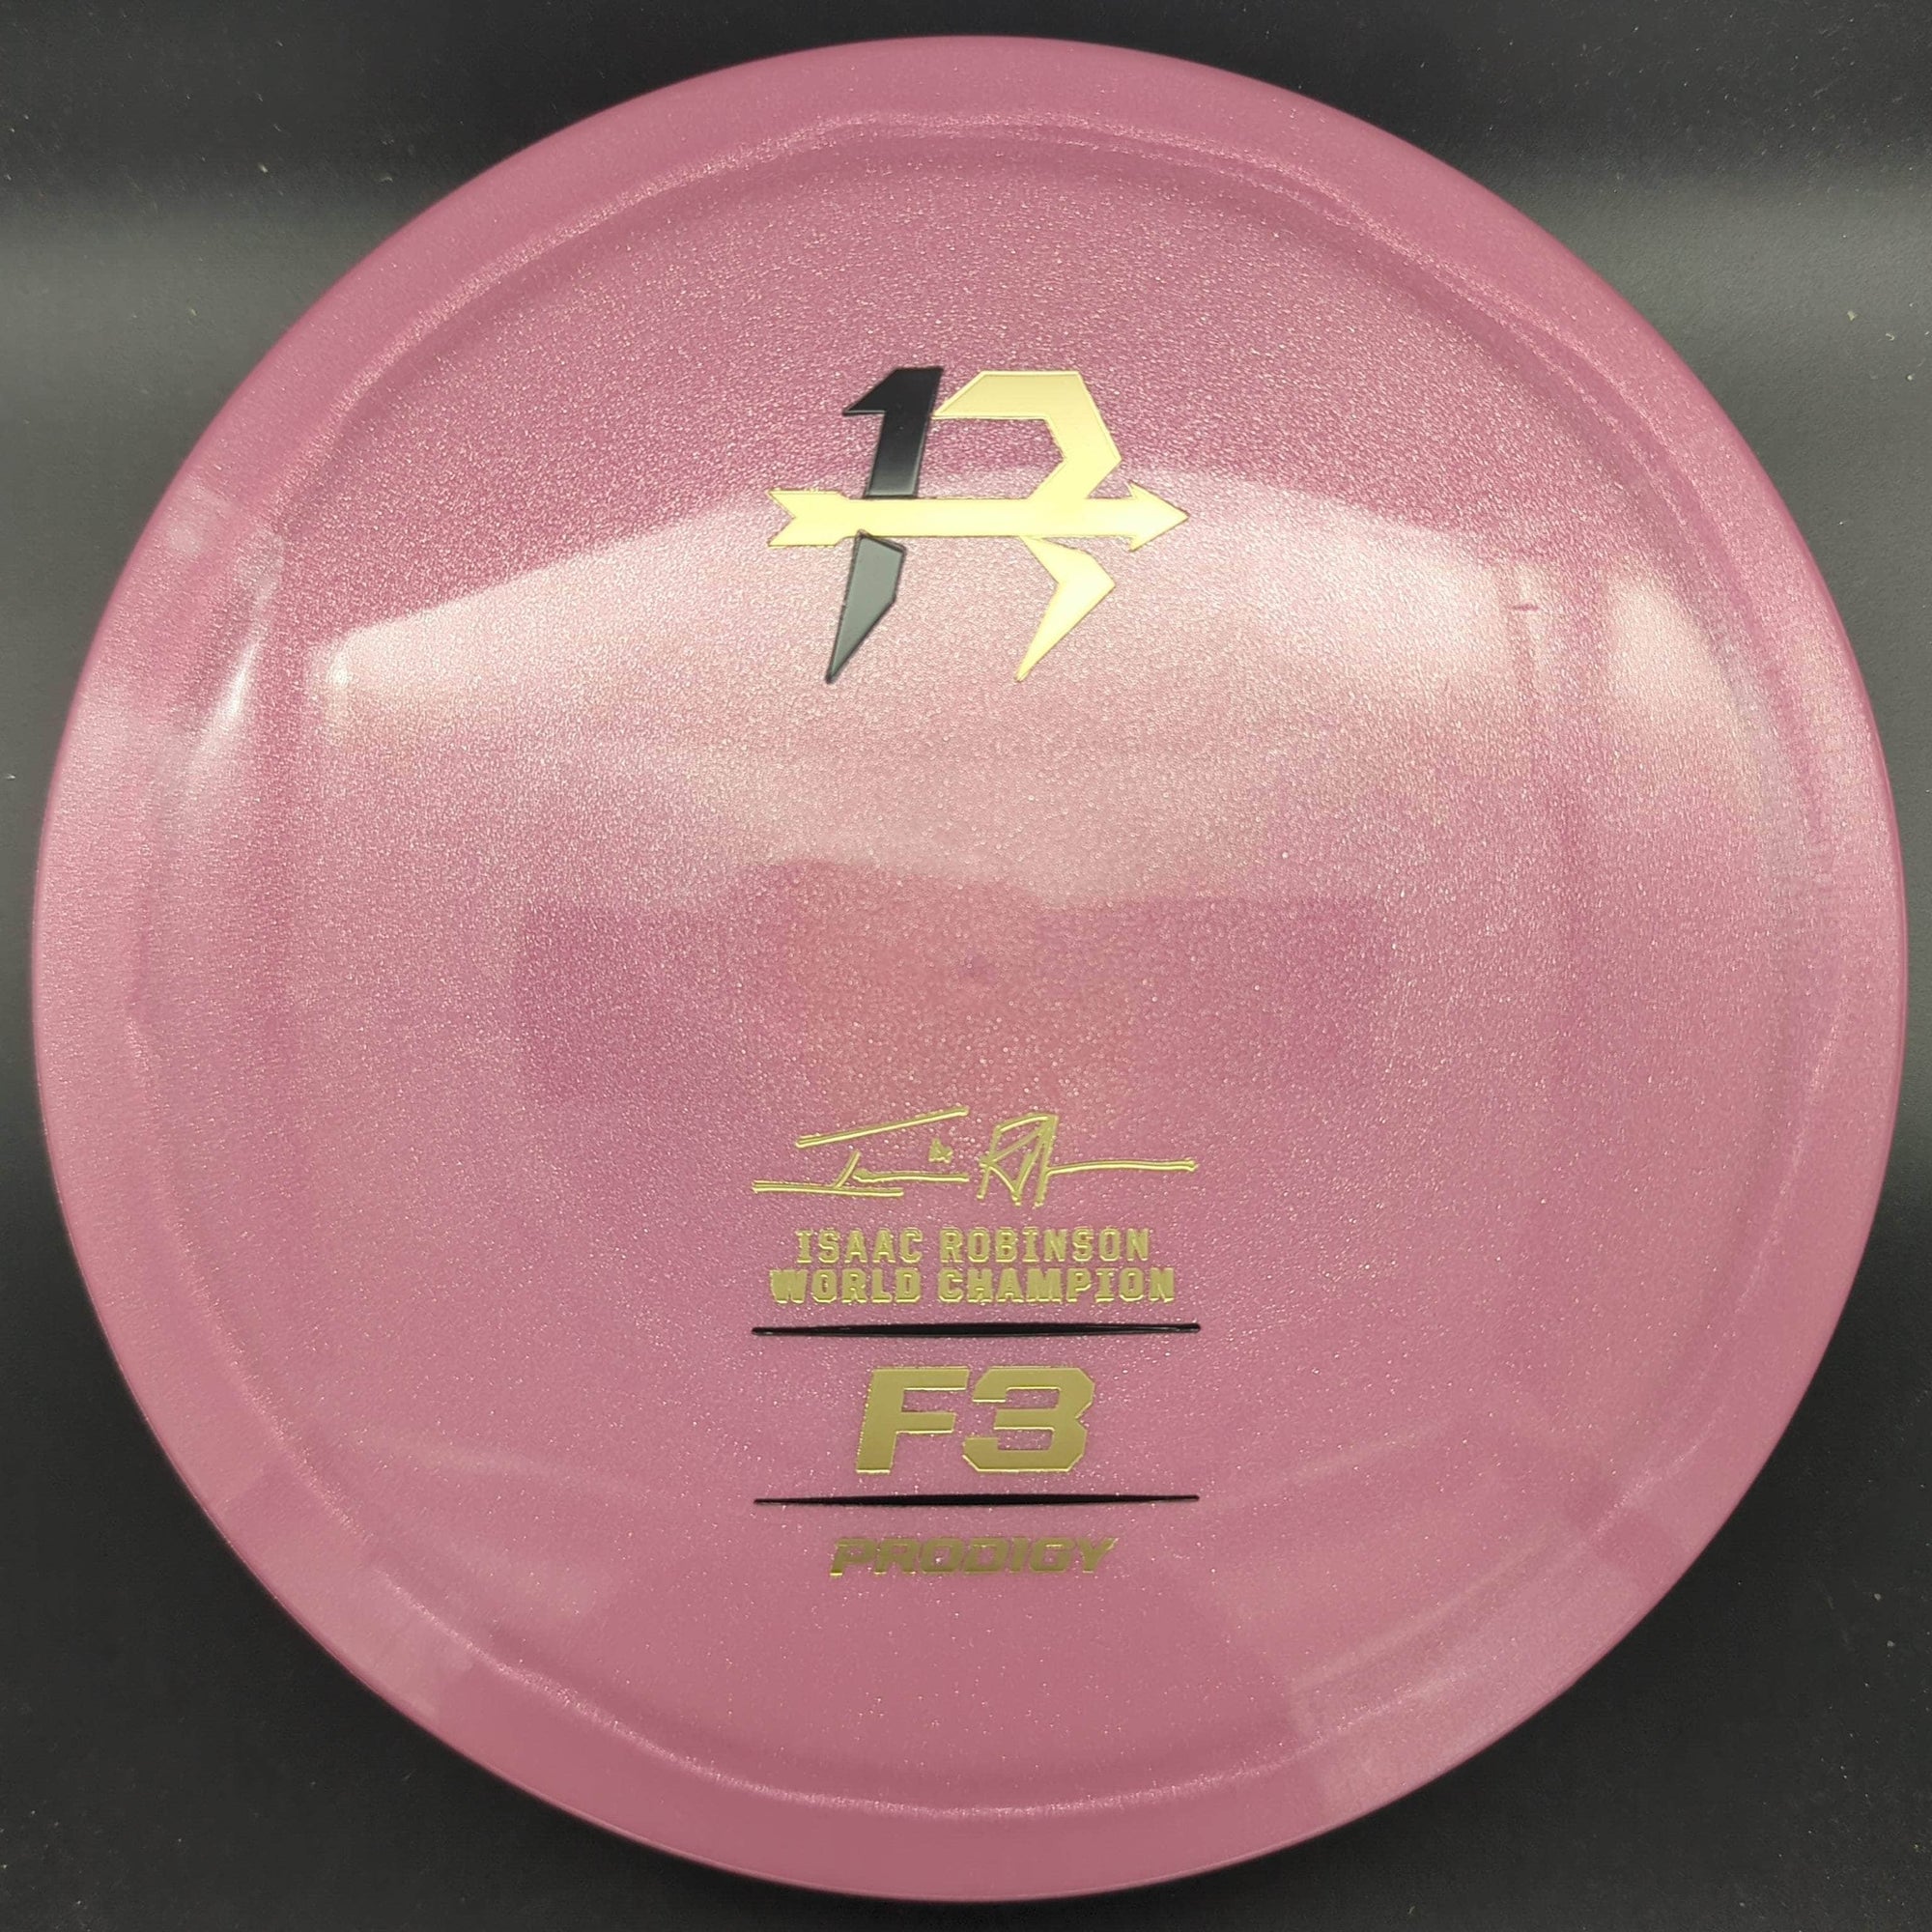 Prodigy Fairway Driver Pink Pale Gold Stamp 174g F3, 400 Glimmer Plastic, Isaac Robinson 2023 World Champion Stamp